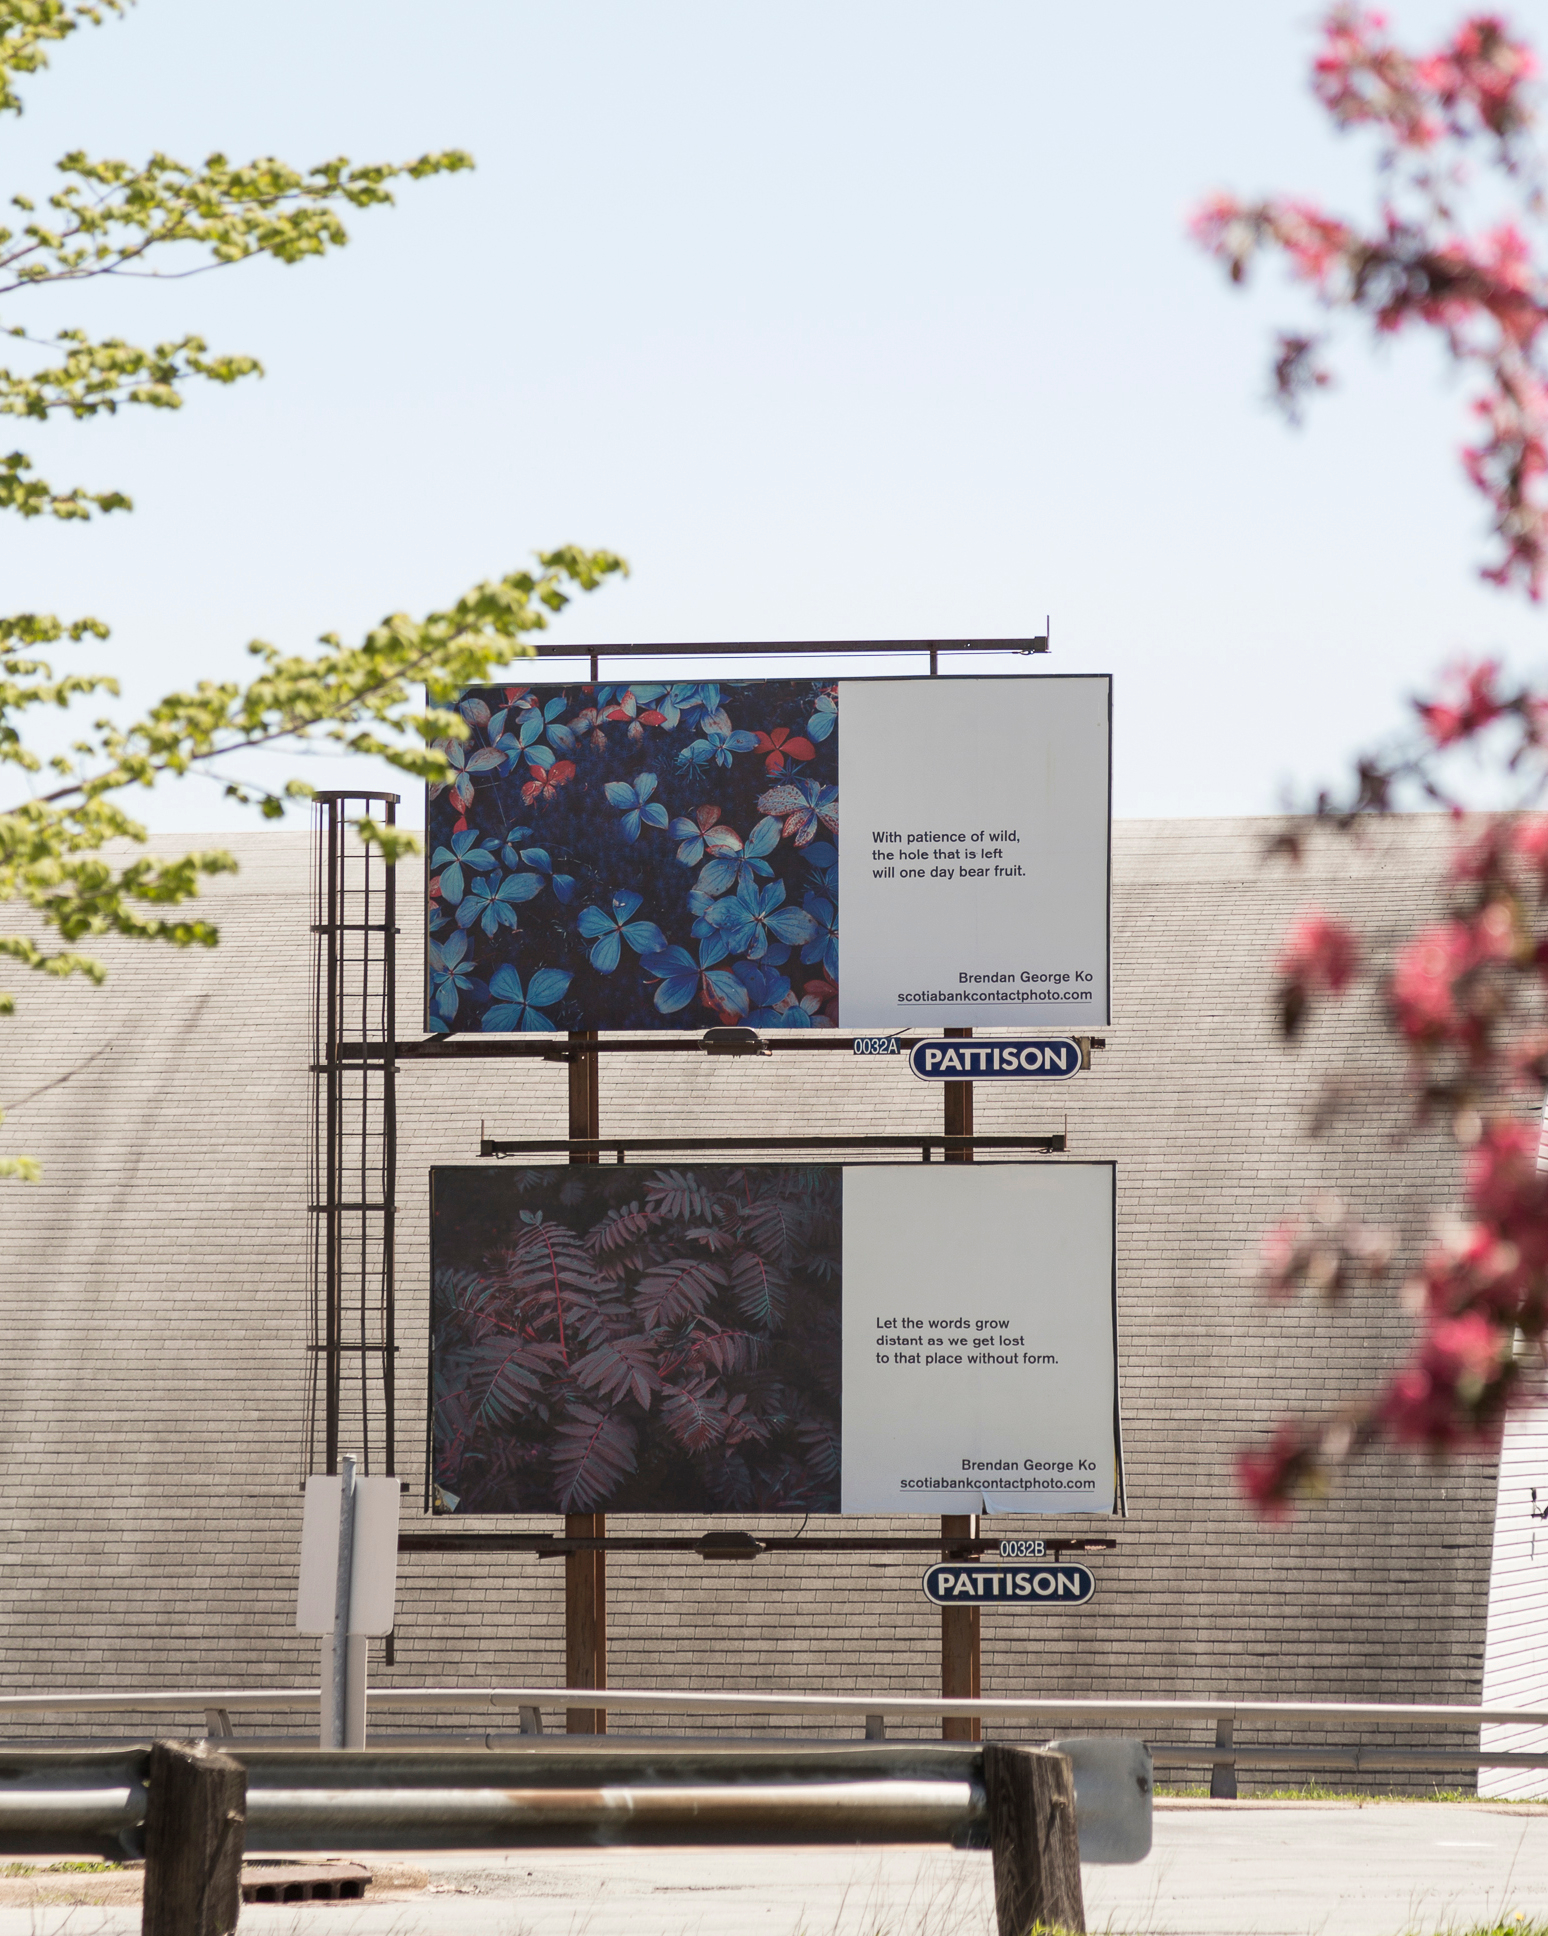     Brendan George Ko, The Forest is Wired for Wisdom, installation on billboards in Halifax and 9 other Canadian cities, 2022. Courtesy of the artist and CONTACT. Photo: Julia Nemfield

